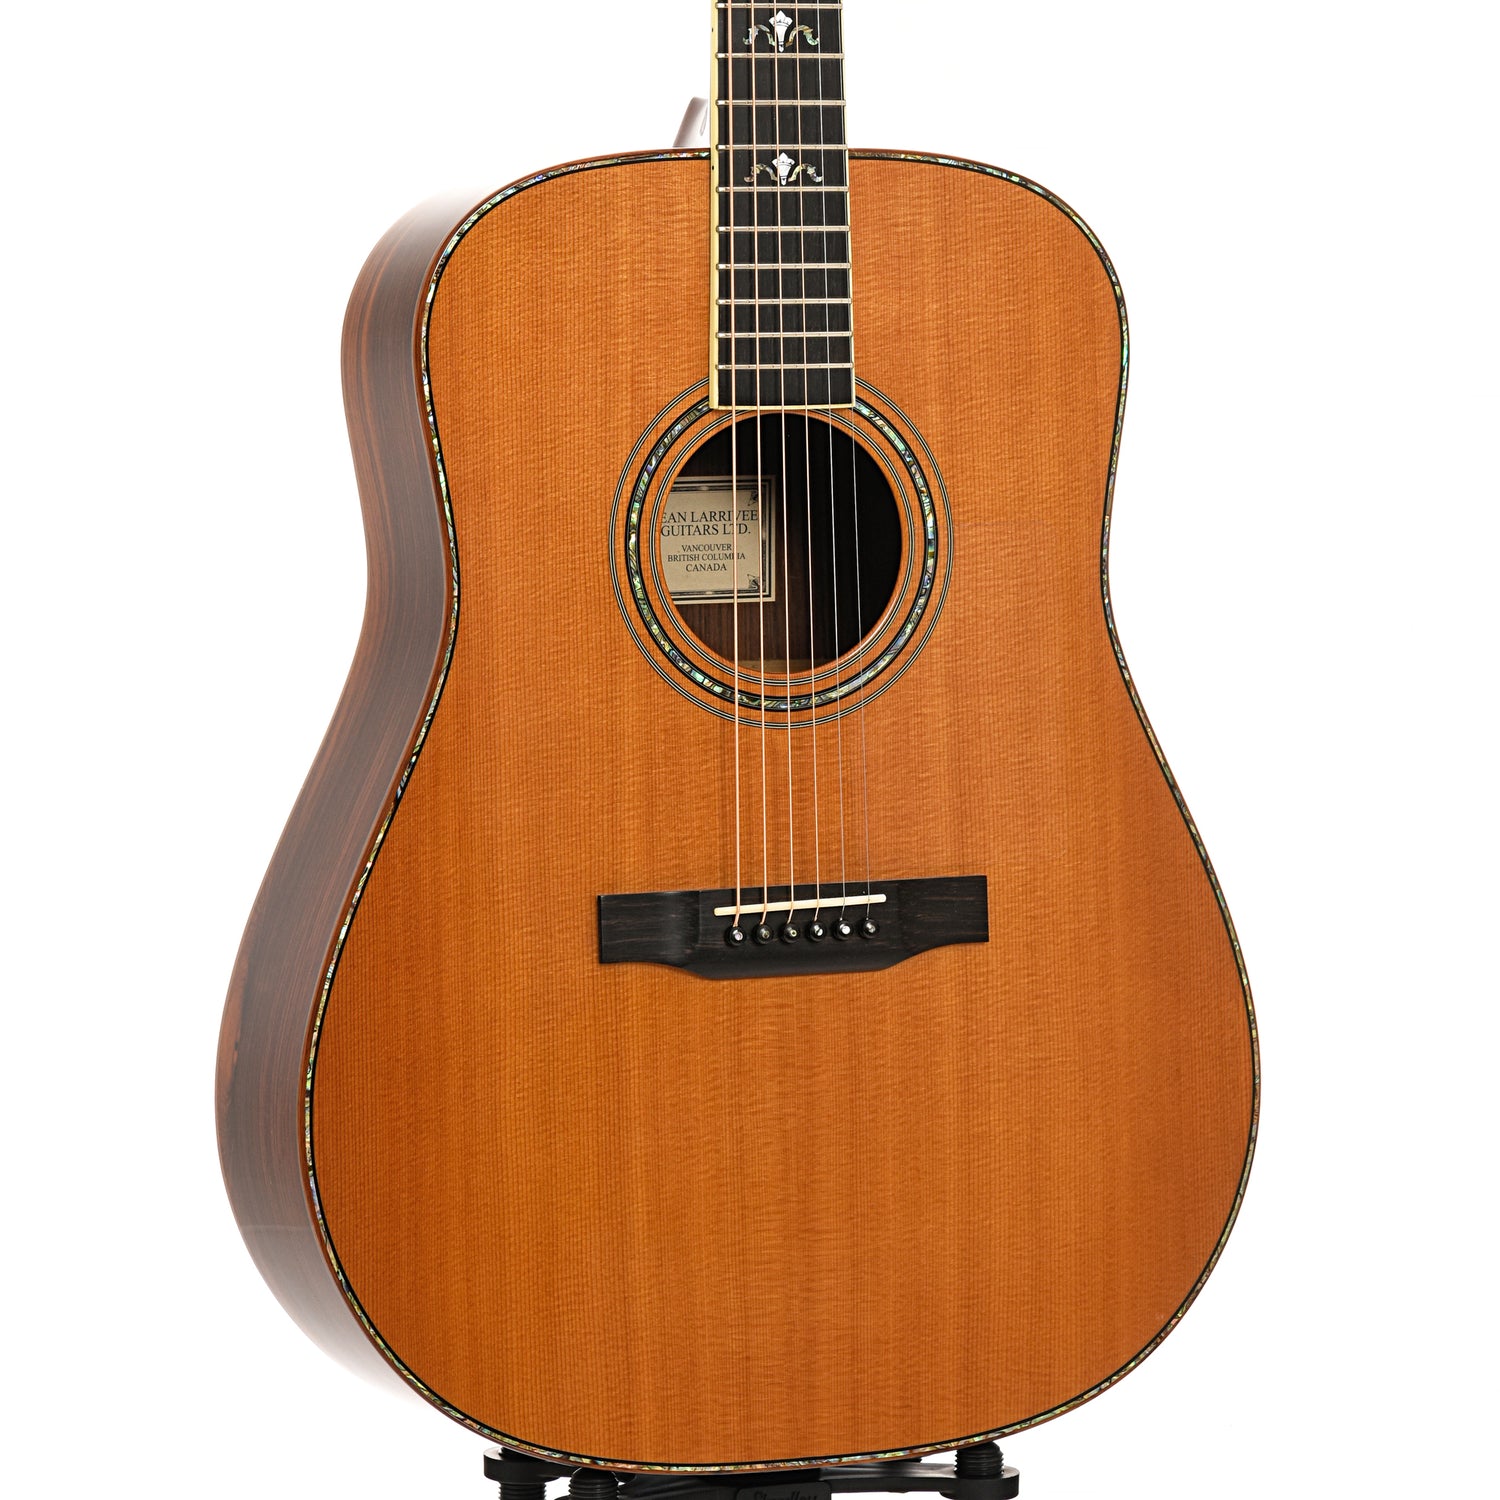 Front and side of Larrivee D-10 Brazilian Acoustic